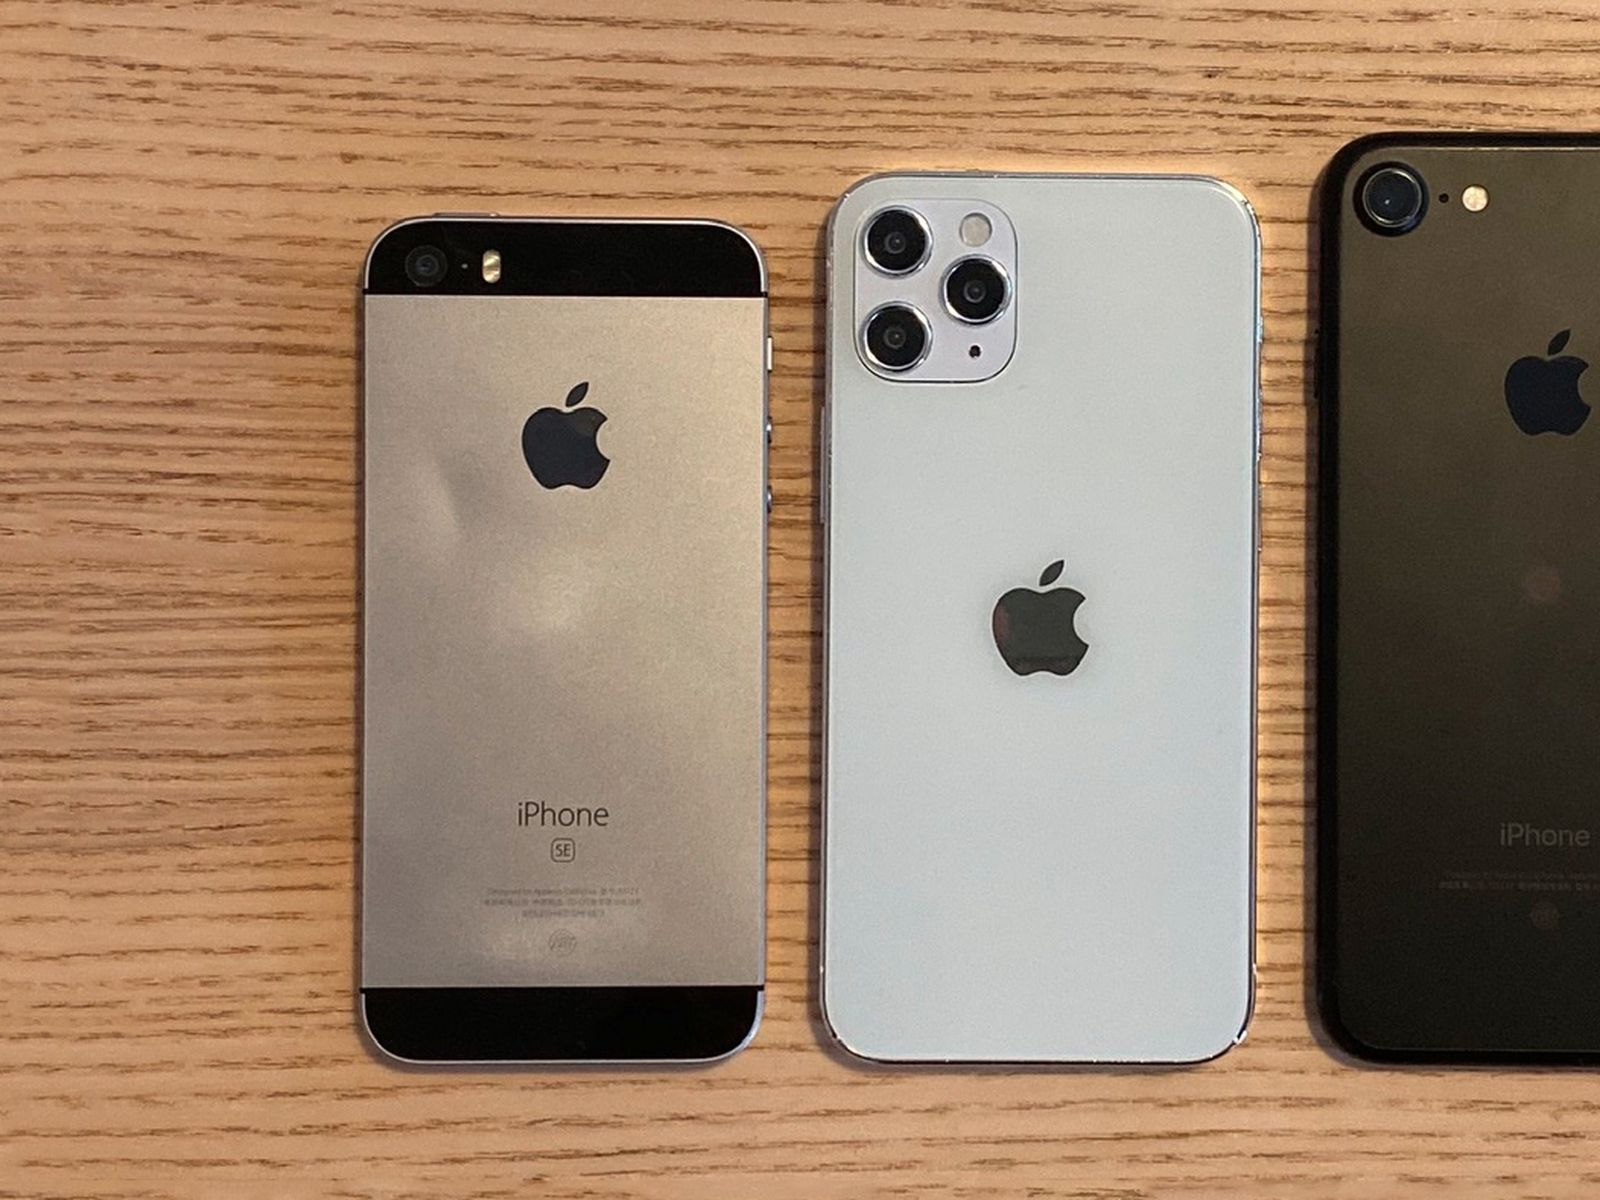 antydning amme Lade være med 5.4-Inch iPhone 12 Model Size Compared to Original iPhone SE and iPhone 7 -  MacRumors